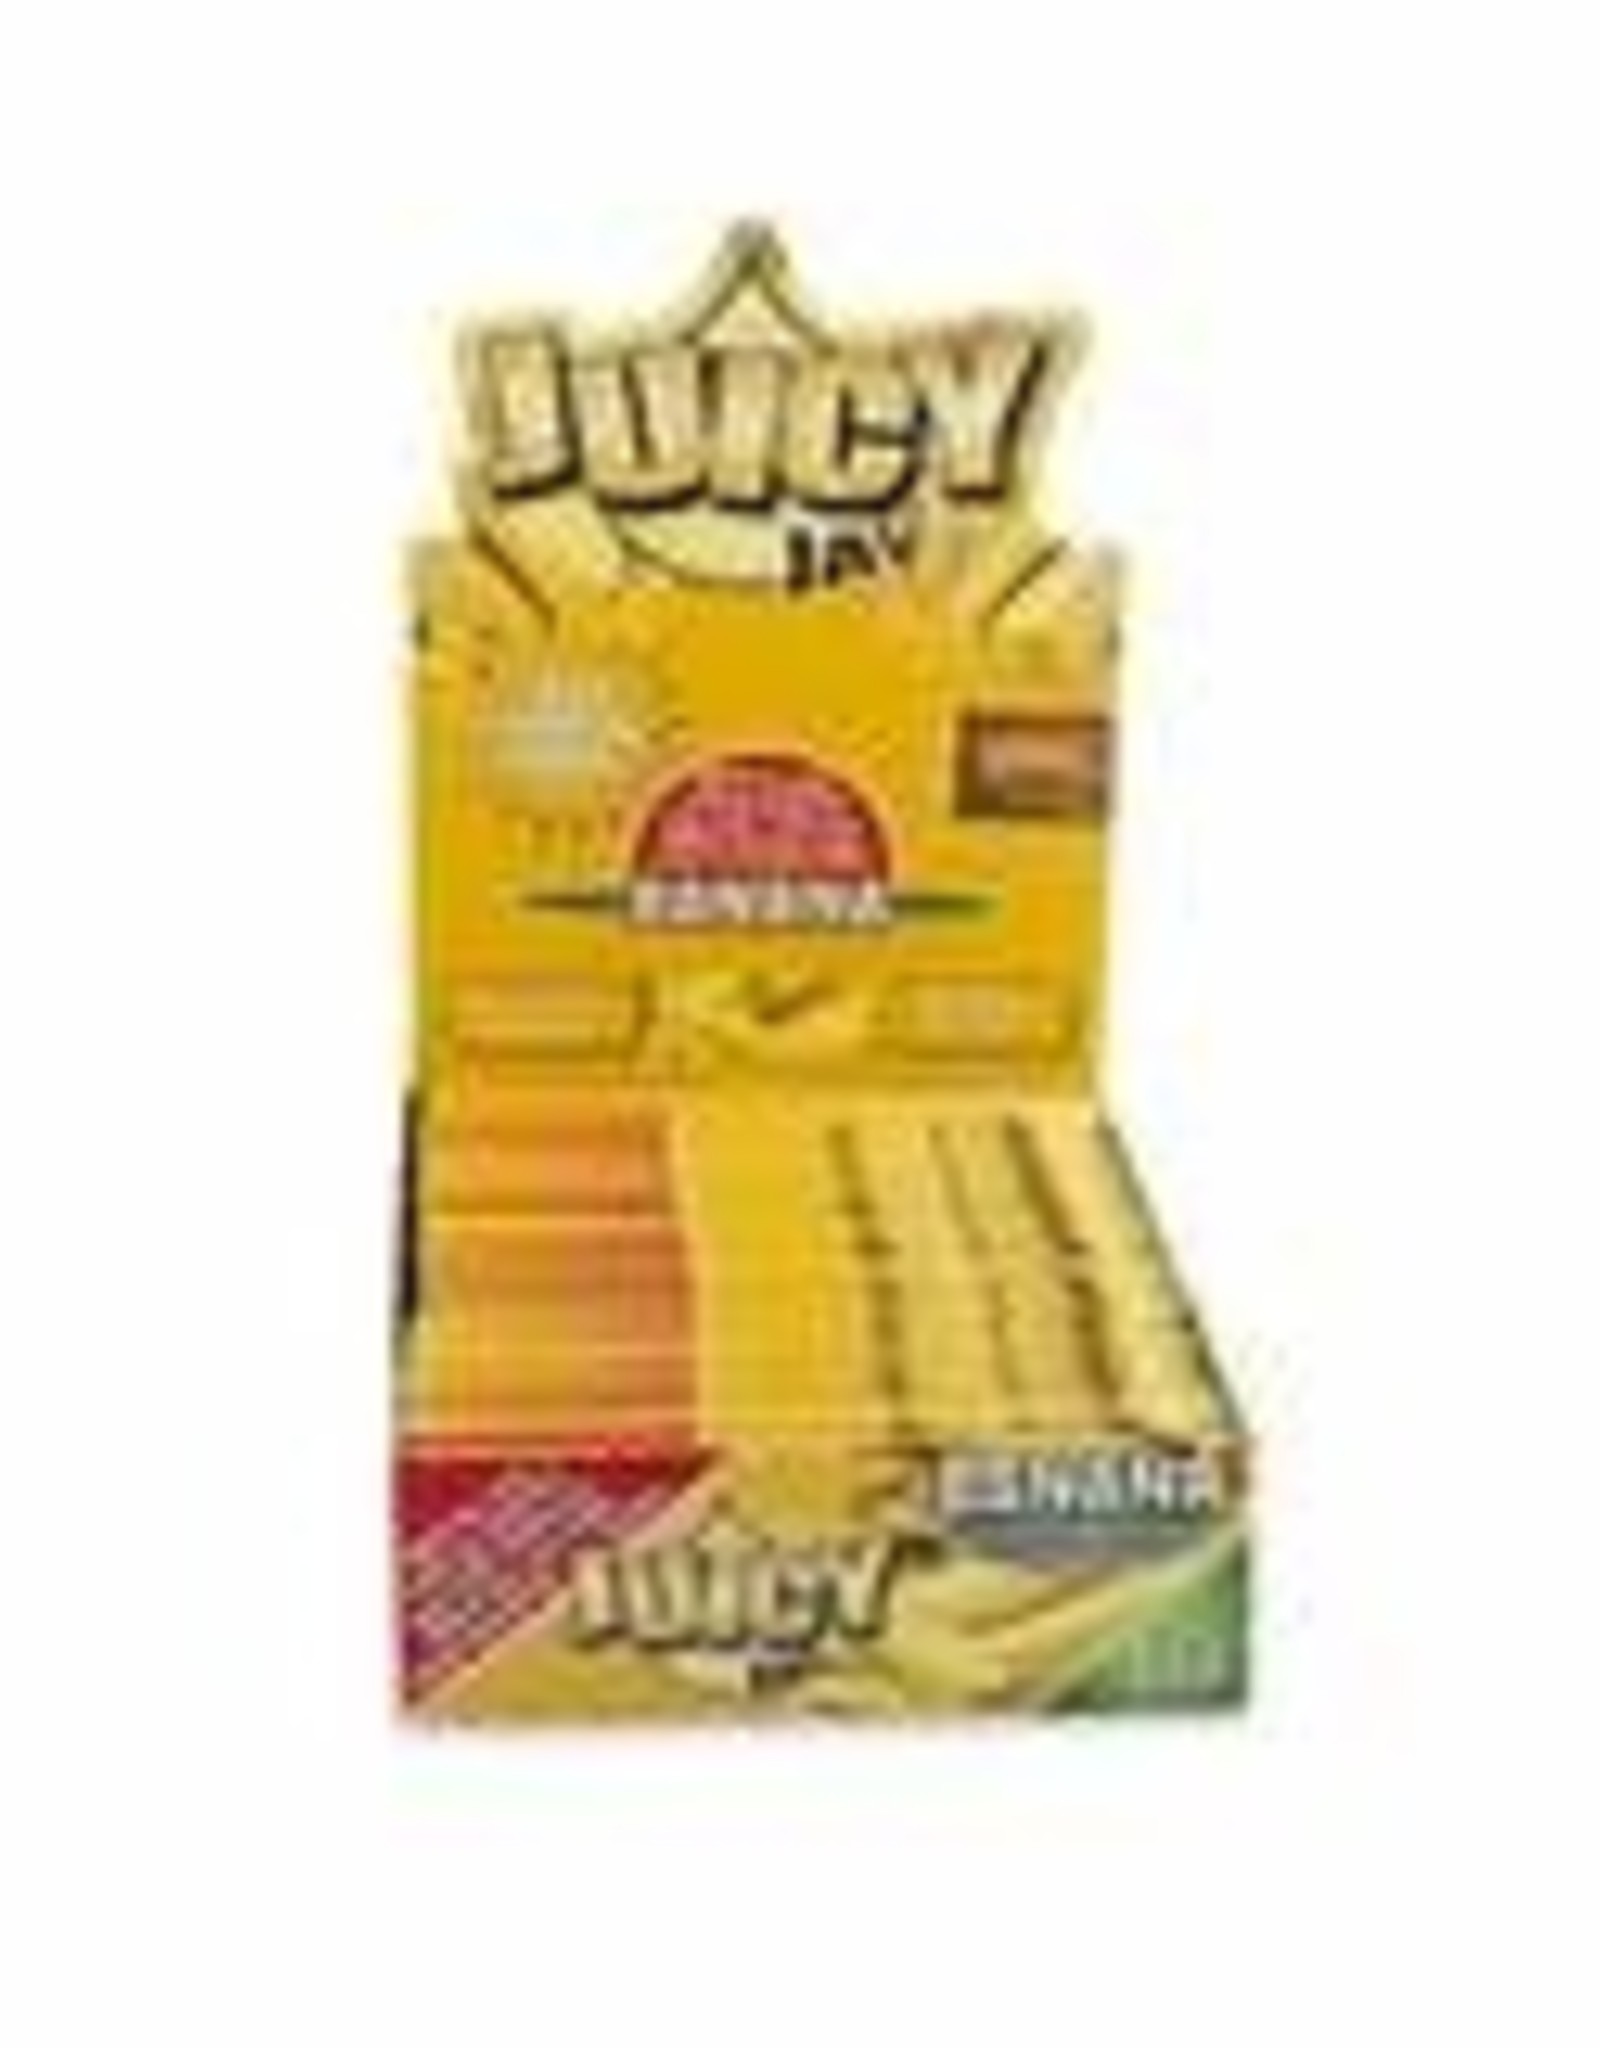 Jucy Jay's Juicy Jay's Flavored 1 1/4 Paper